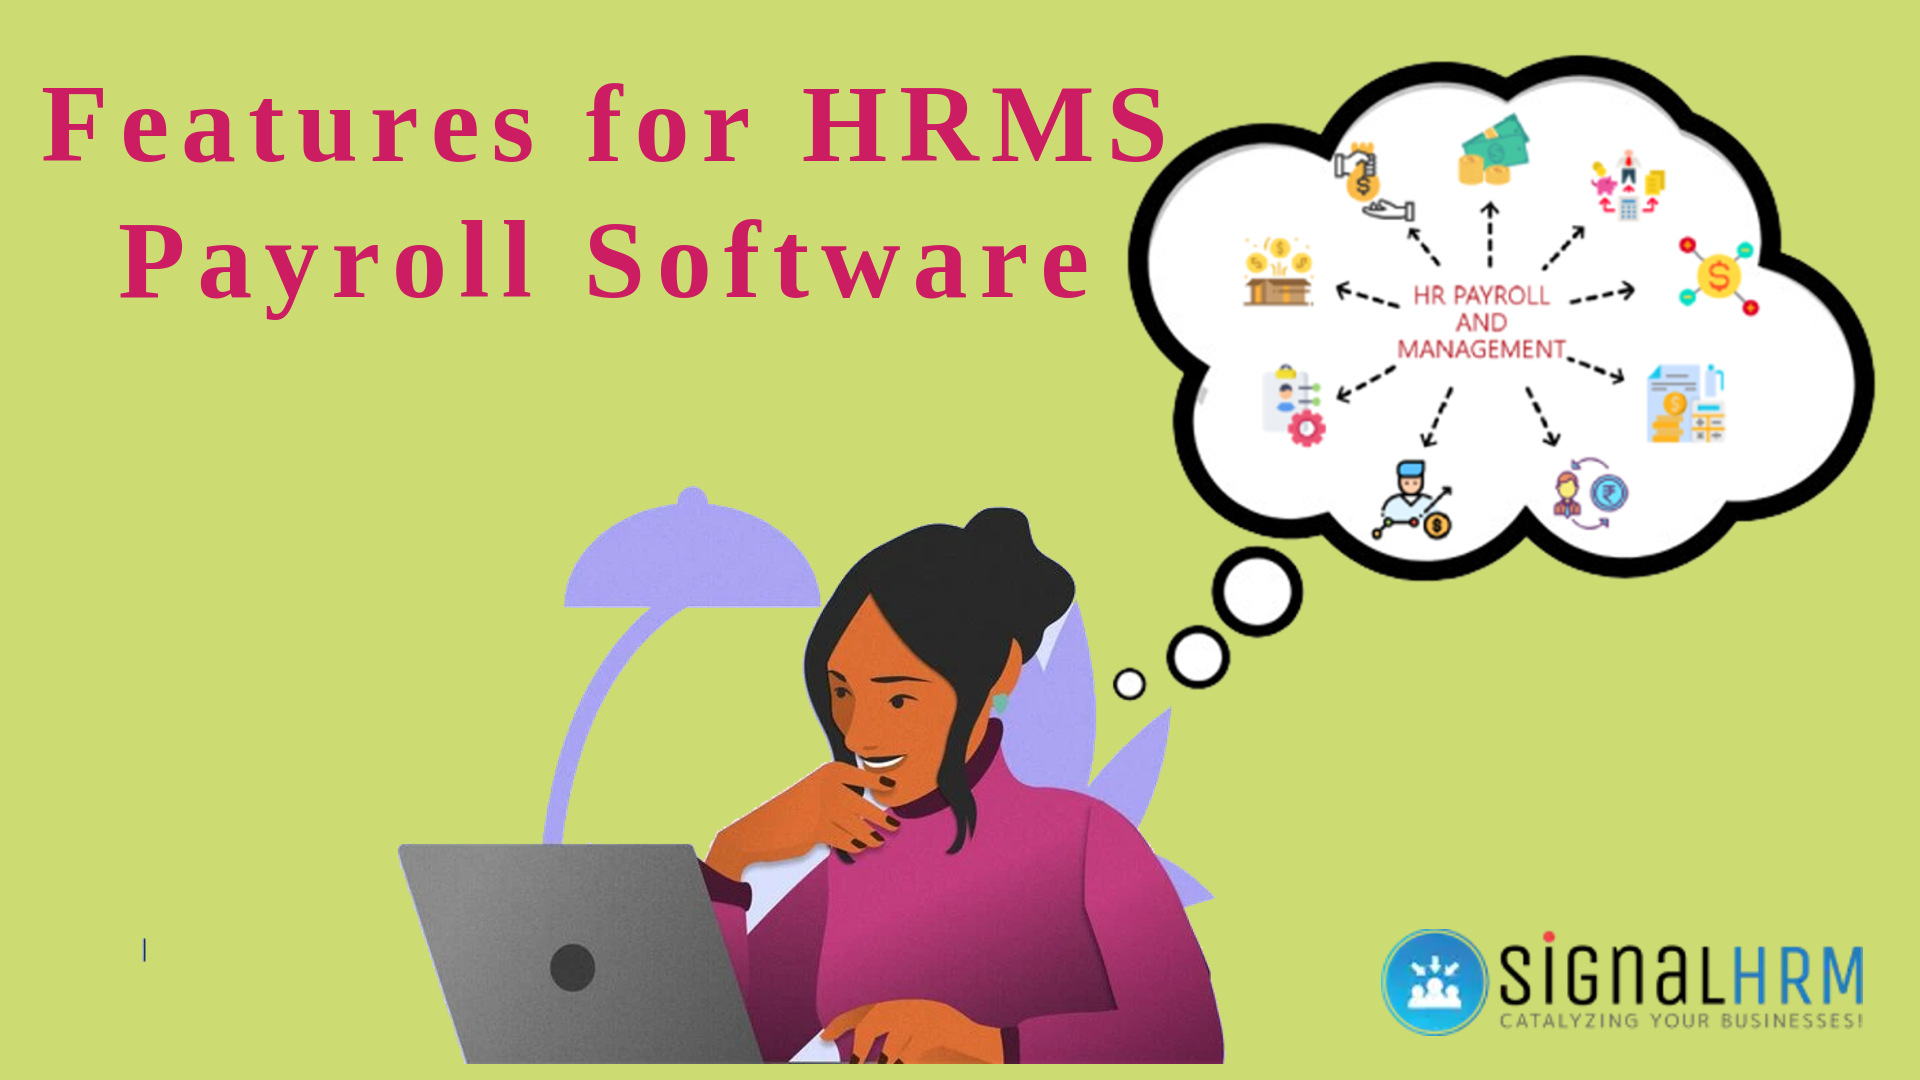 Features for HRMS Payroll Software